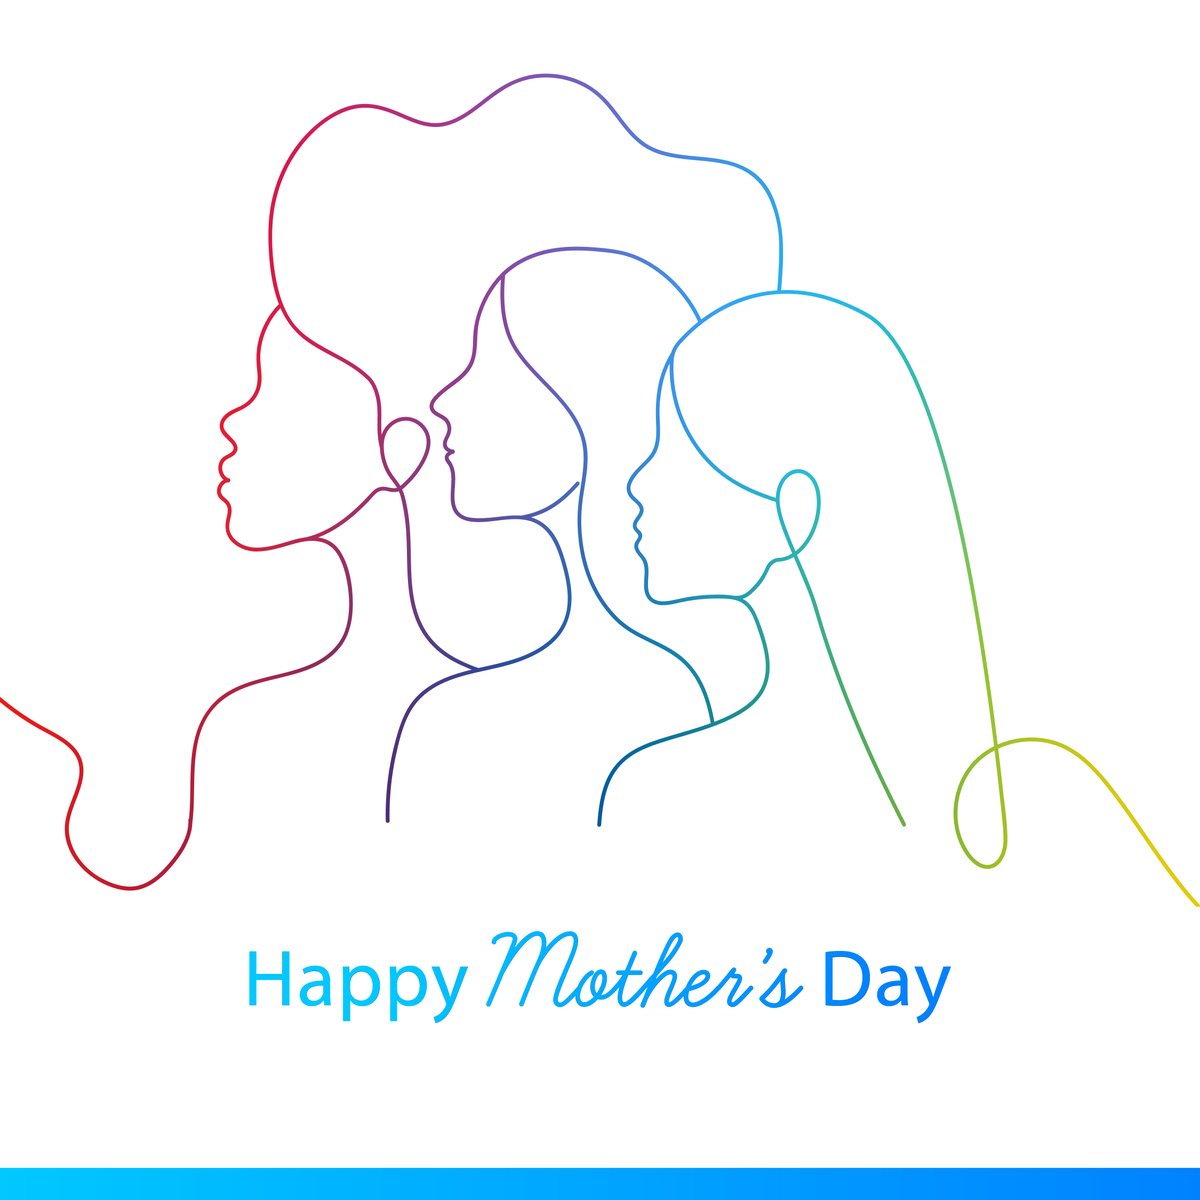 This Mother's Day, we celebrate the love and support that comes in all forms. Whether it's a mom, aunt, mentor, or someone who has walked beside you on life's journey, we recognise the profound impact they have. 💖 Thank you for guiding us through life's adventures.❤️